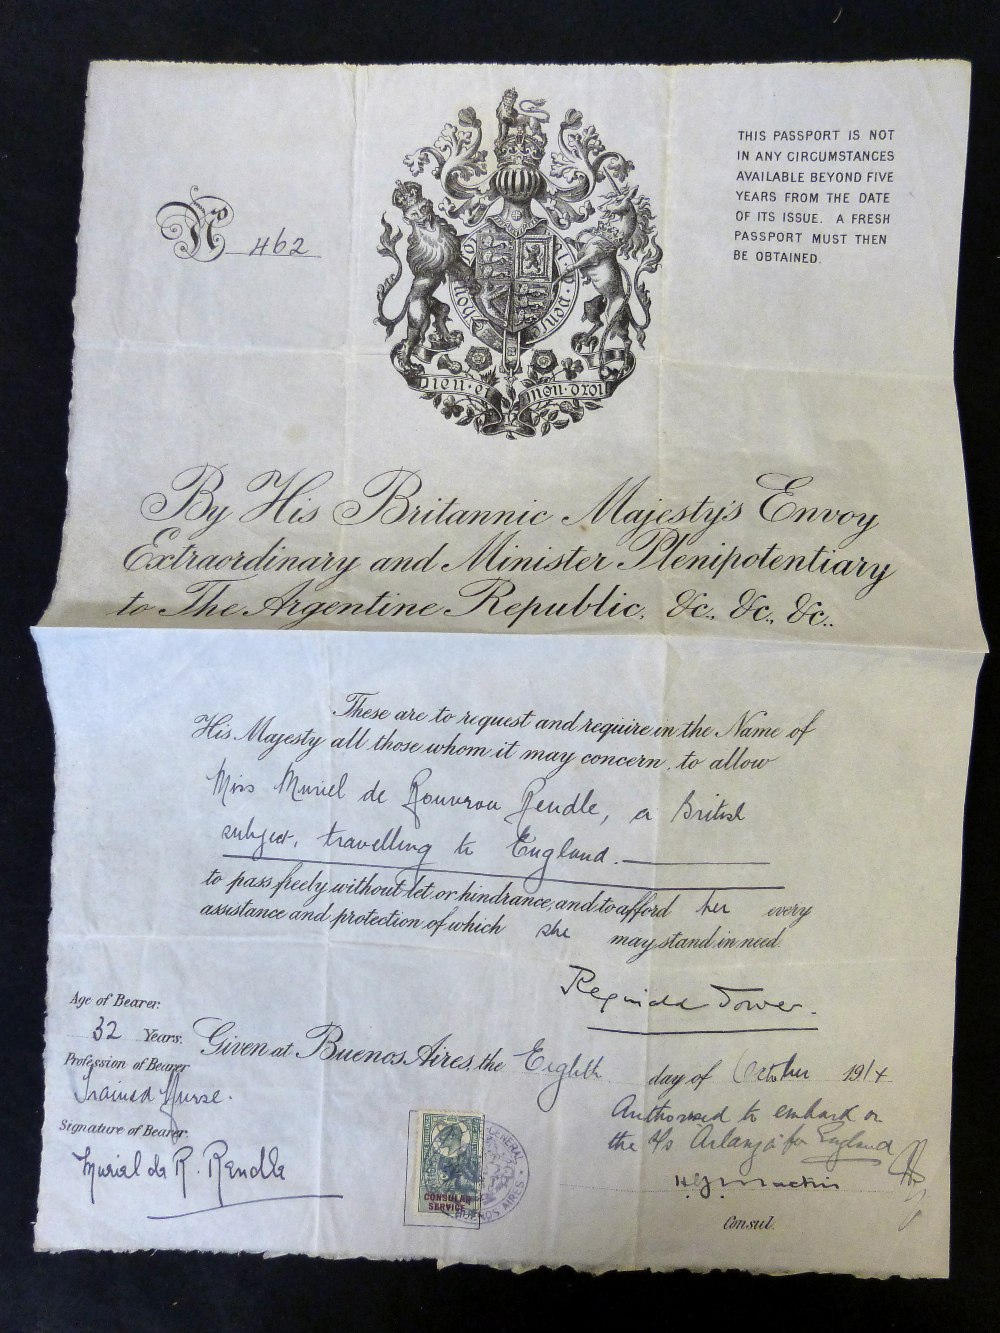 *An engraved passport issued by The British Consulate Buenos Aires issued to Miss Muriel de Rouvron